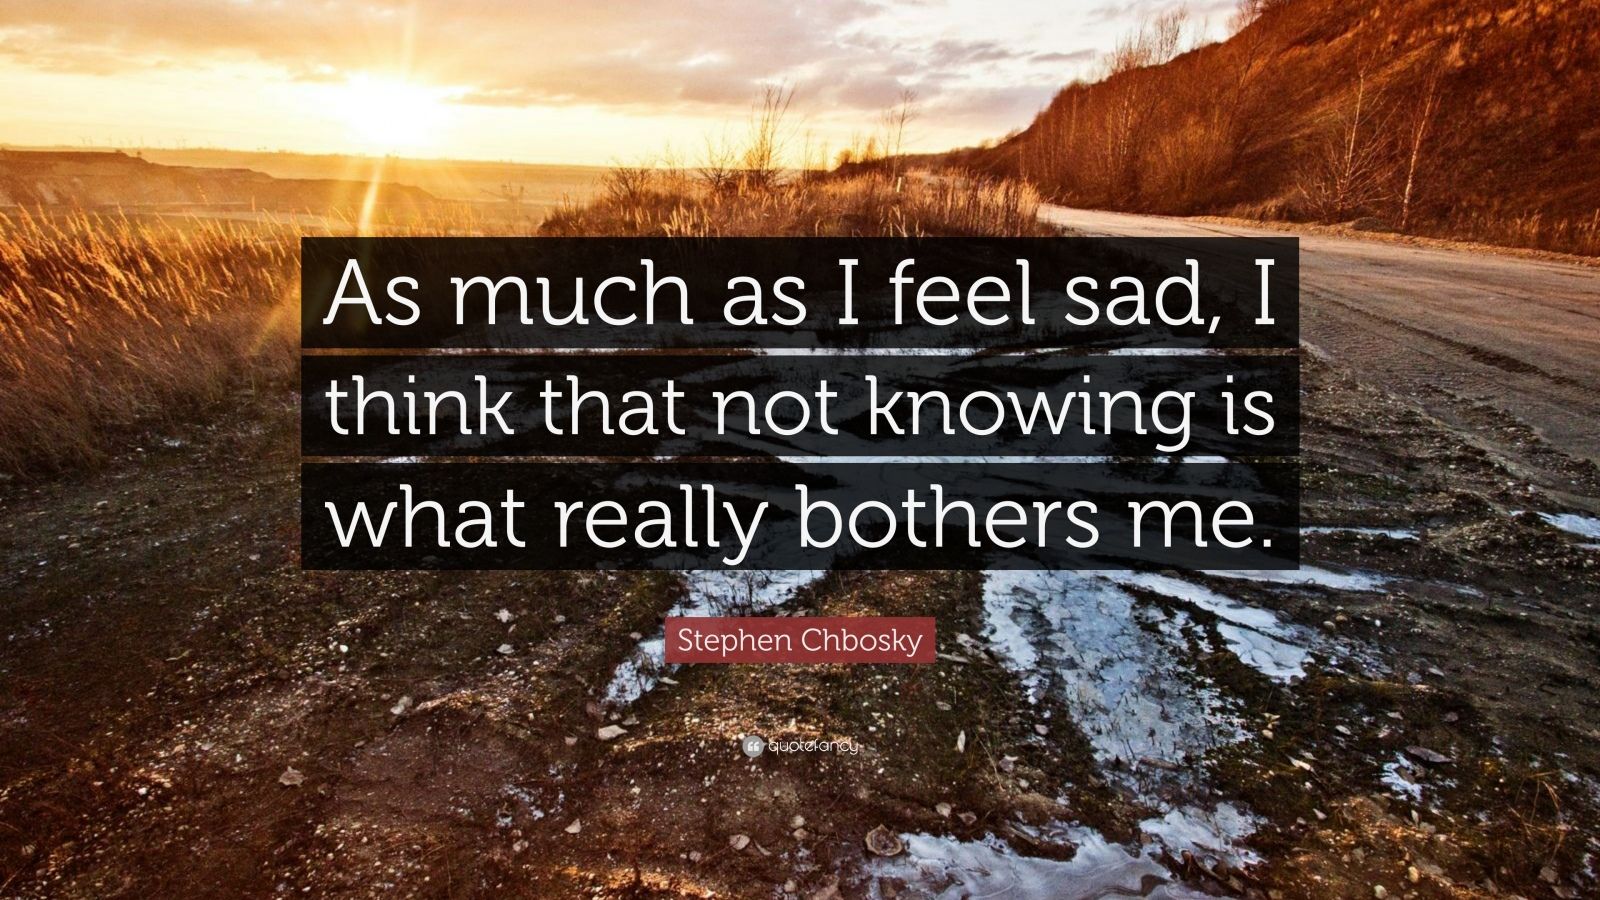 Stephen Chbosky Quote: “As much as I feel sad, I think that not knowing ...